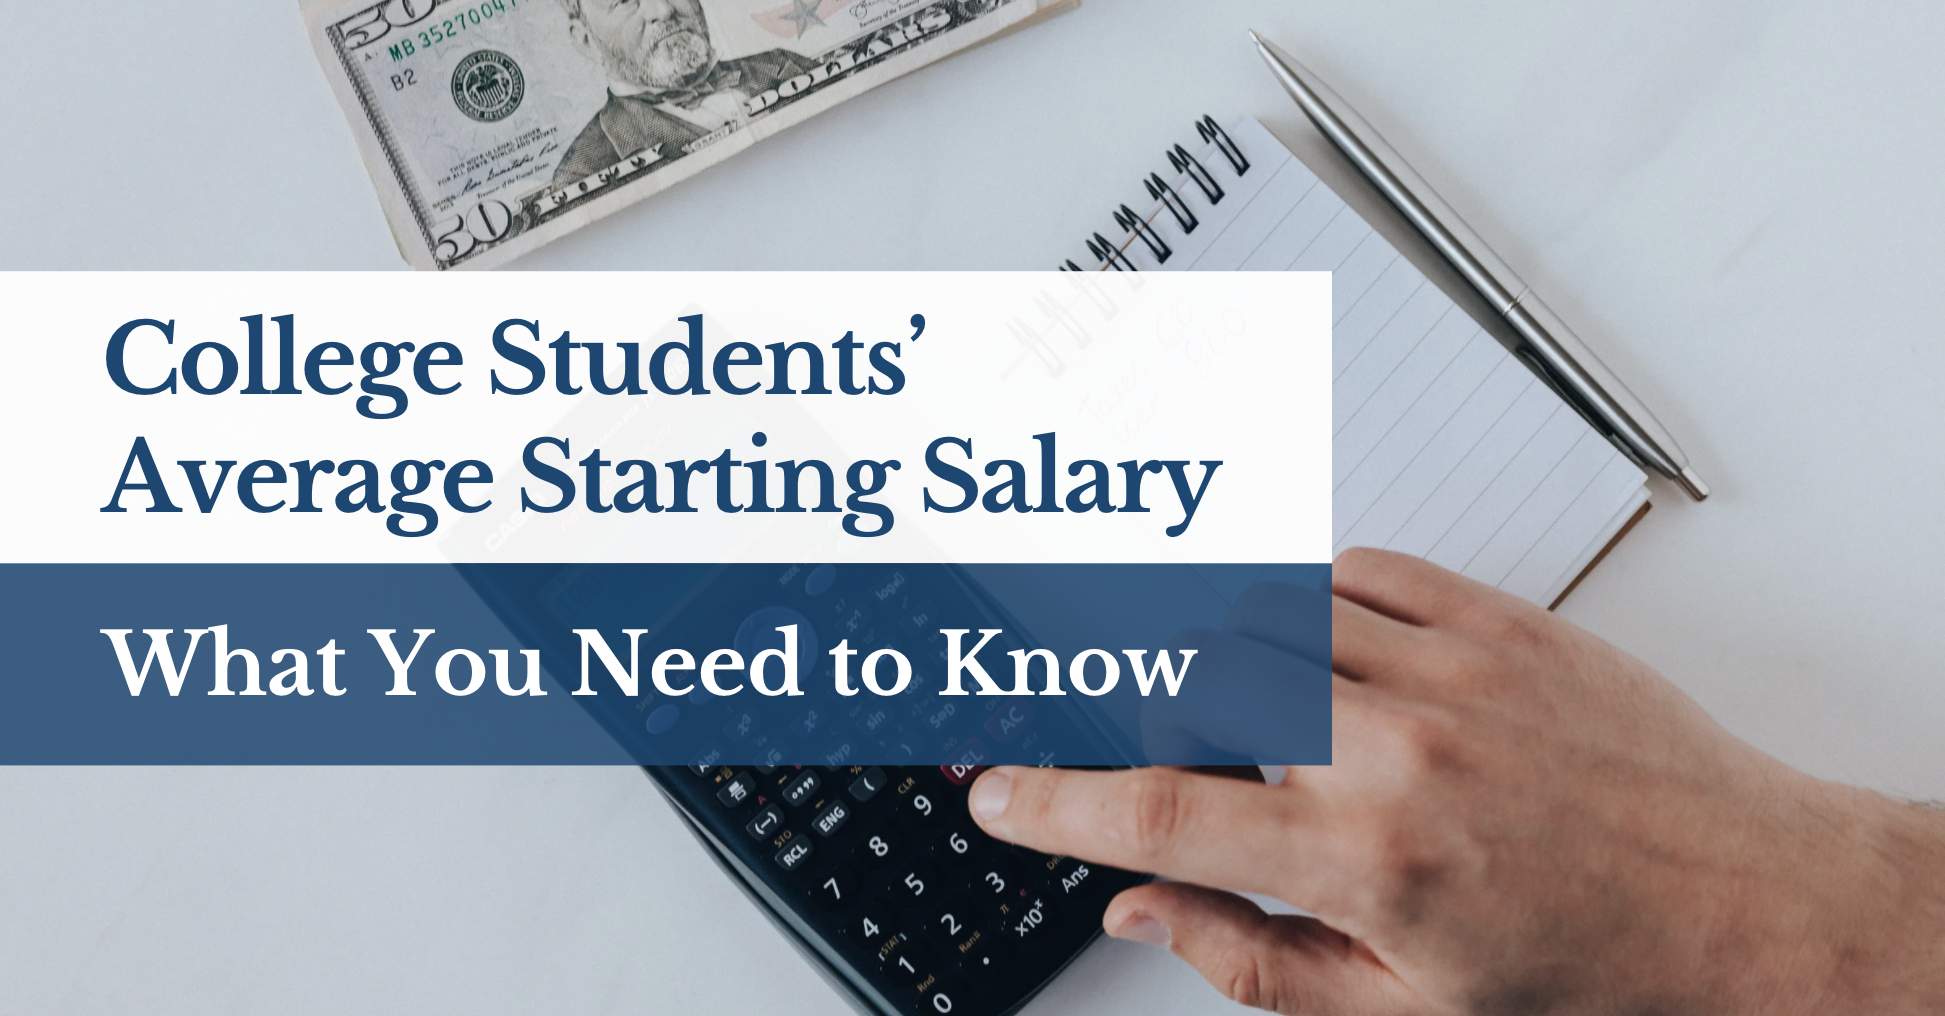 College Students’ Average Starting Salary